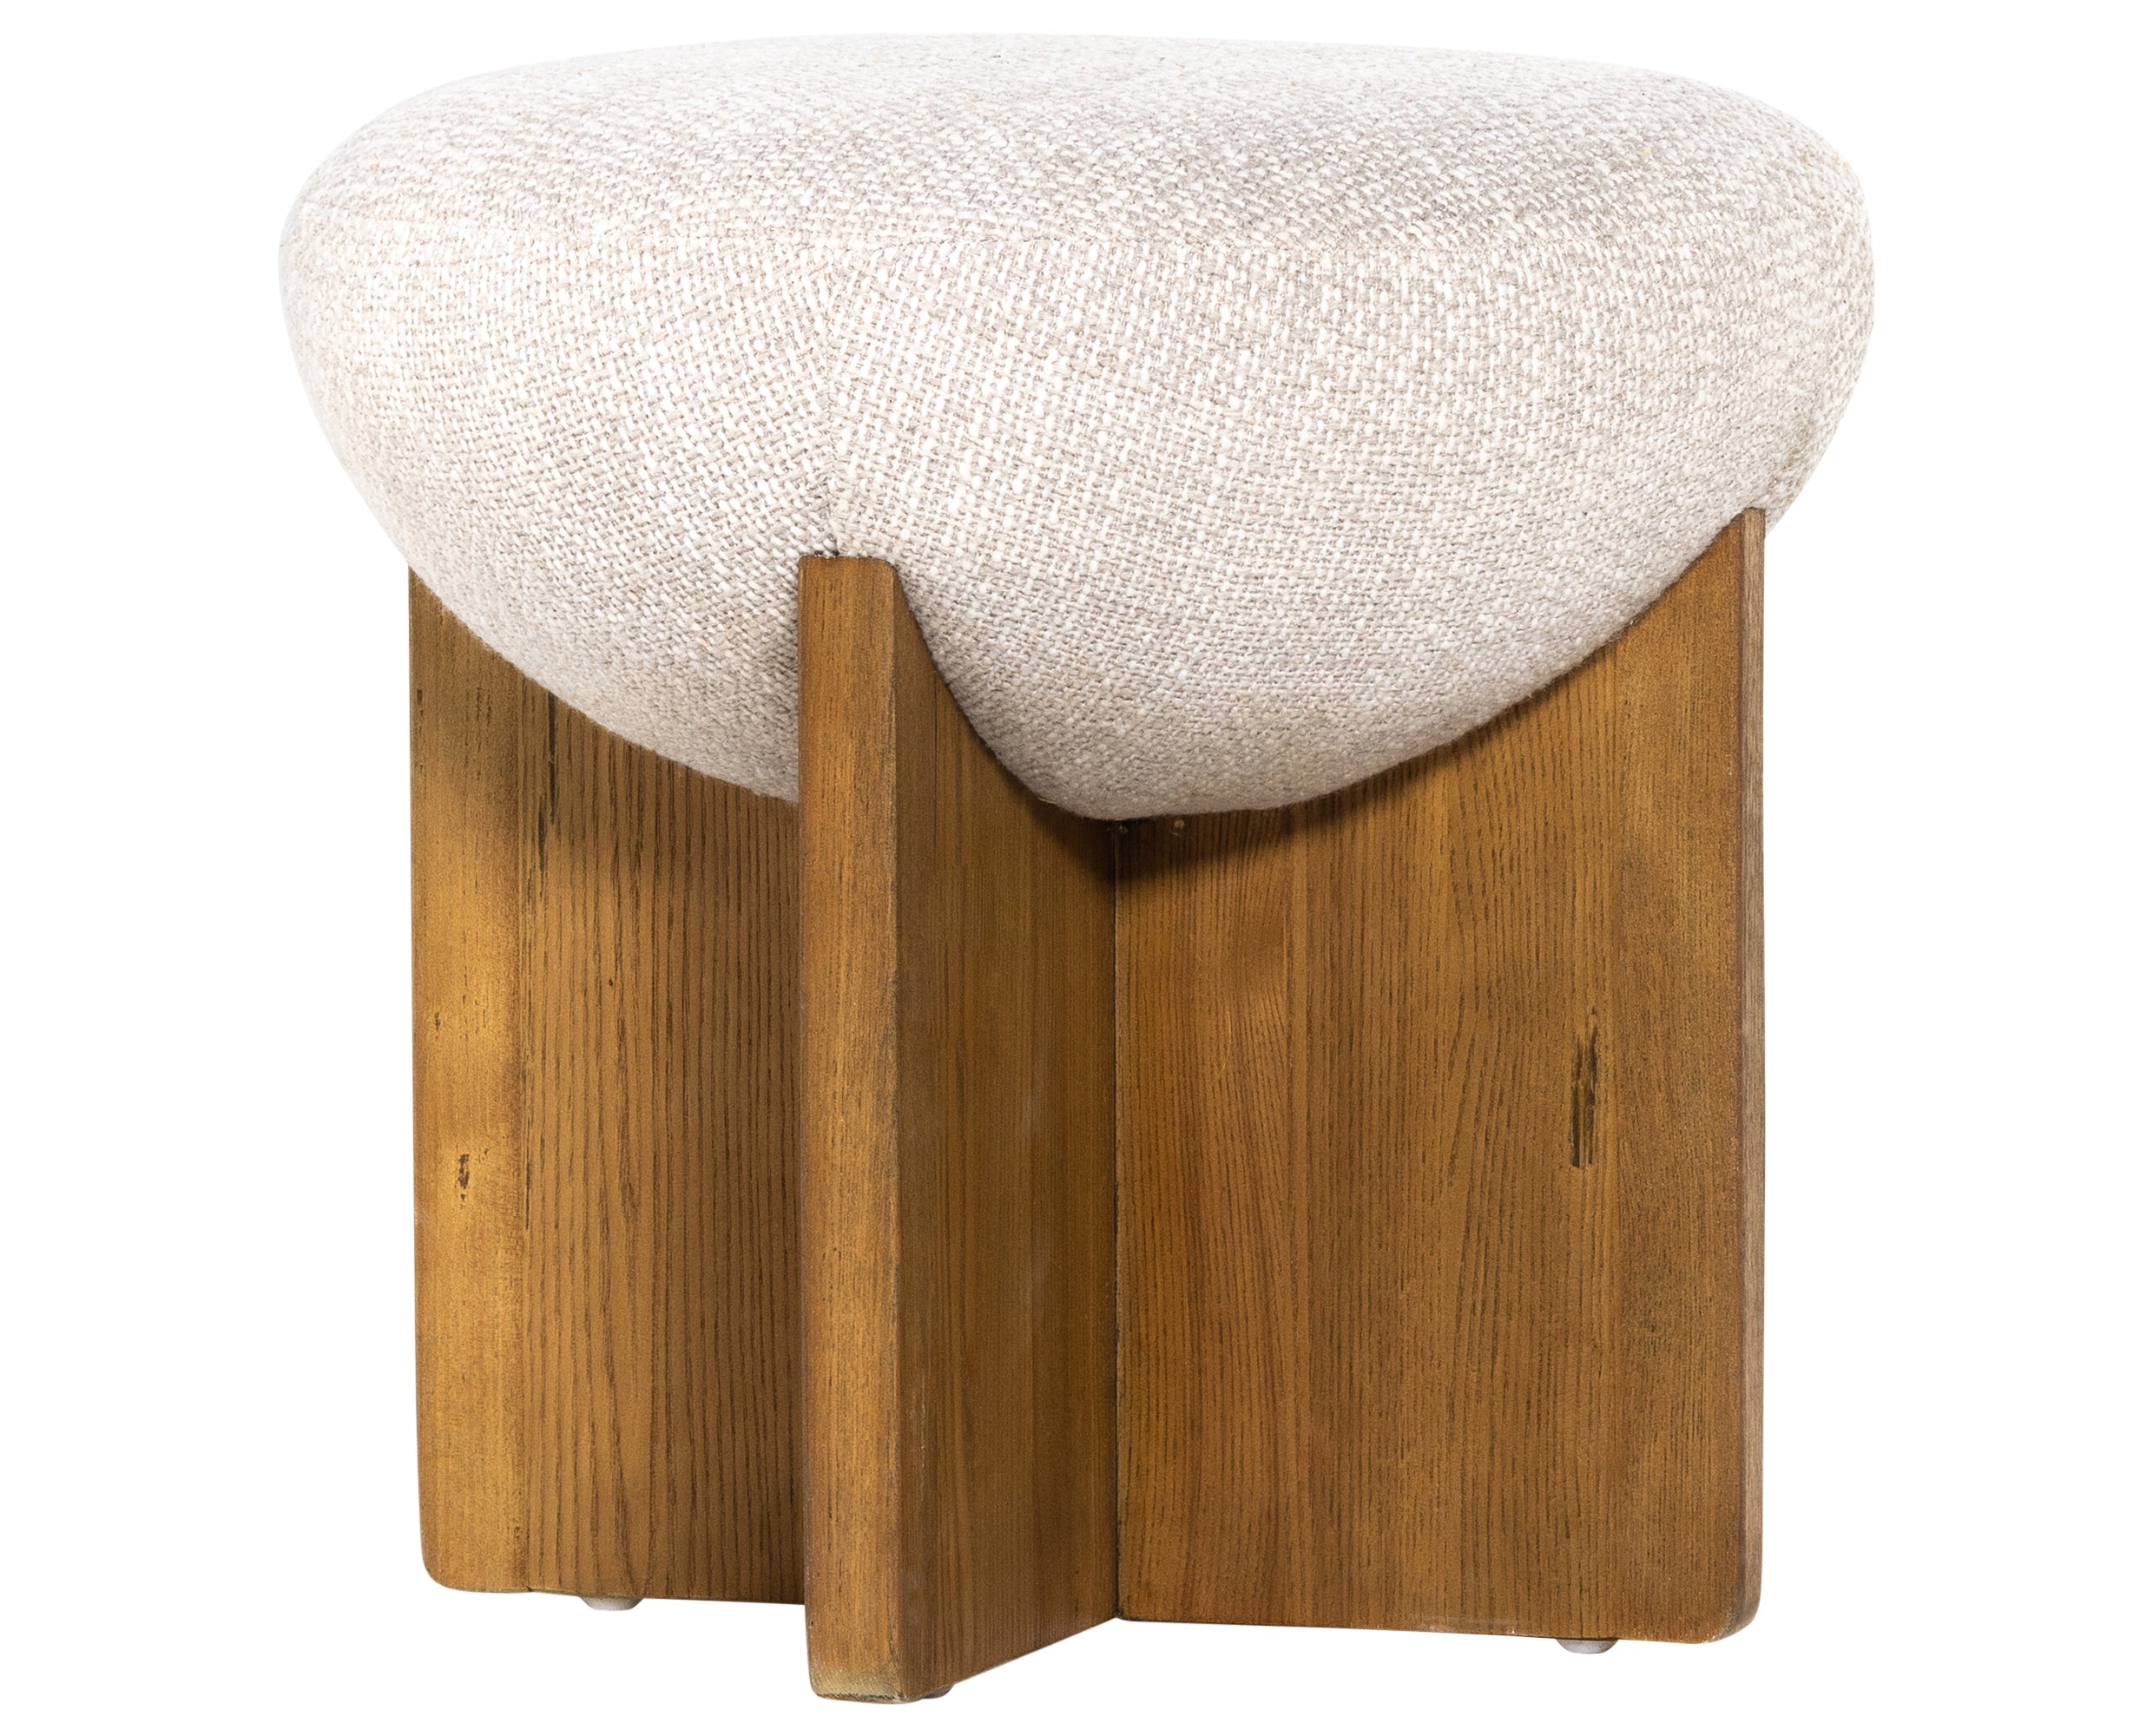 Gibson Wheat Fabric with Toasted Ash | Dax Small Ottoman | Valley Ridge Furniture